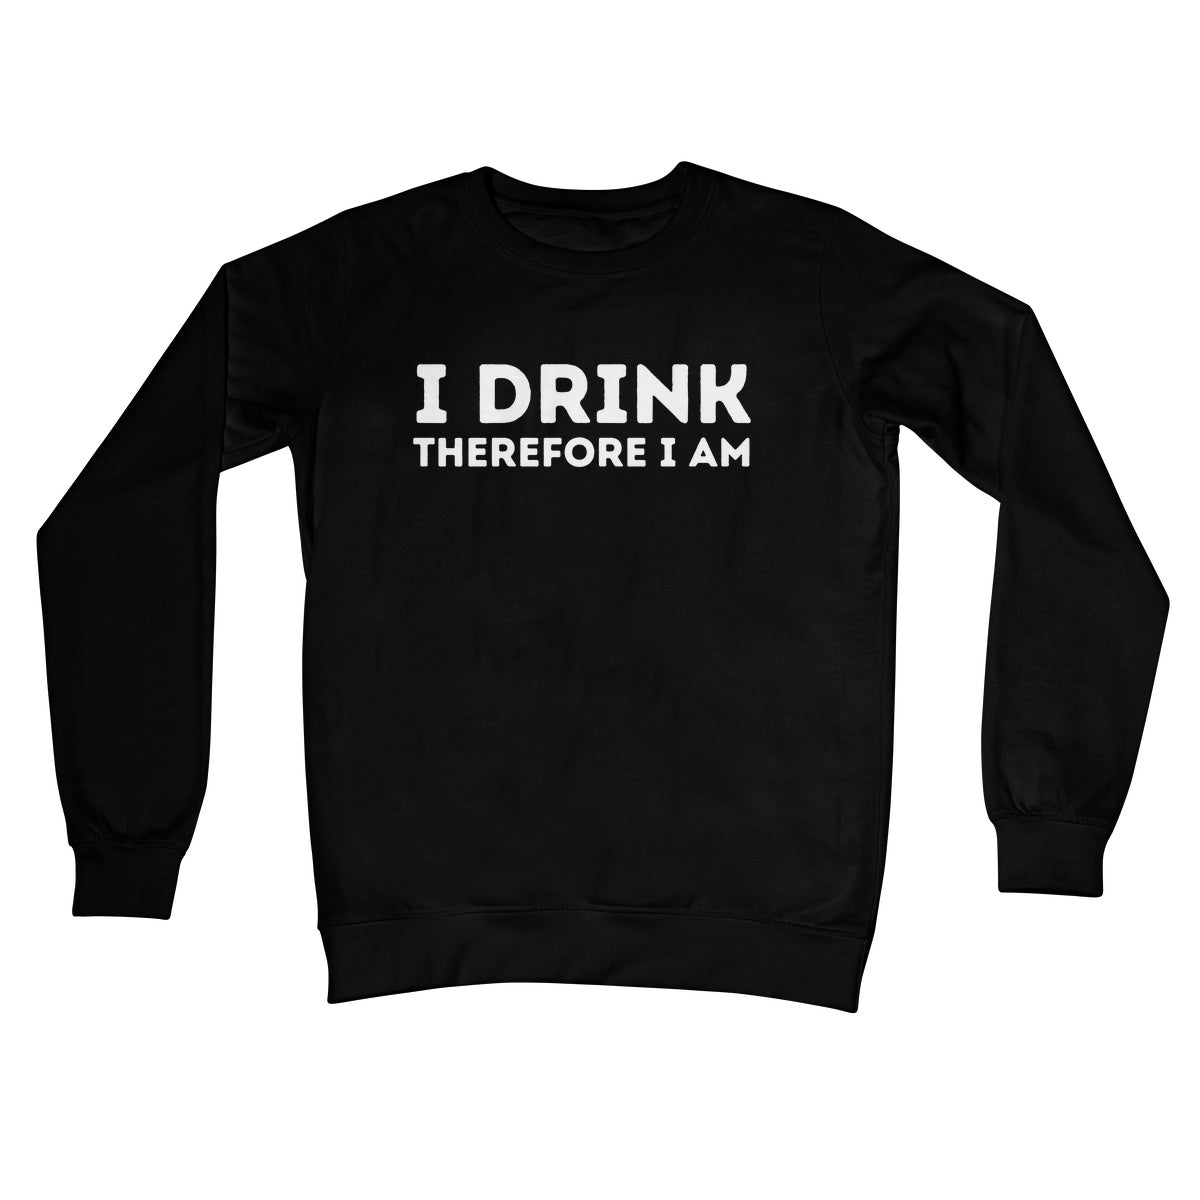 I drink therefore I am jumper black